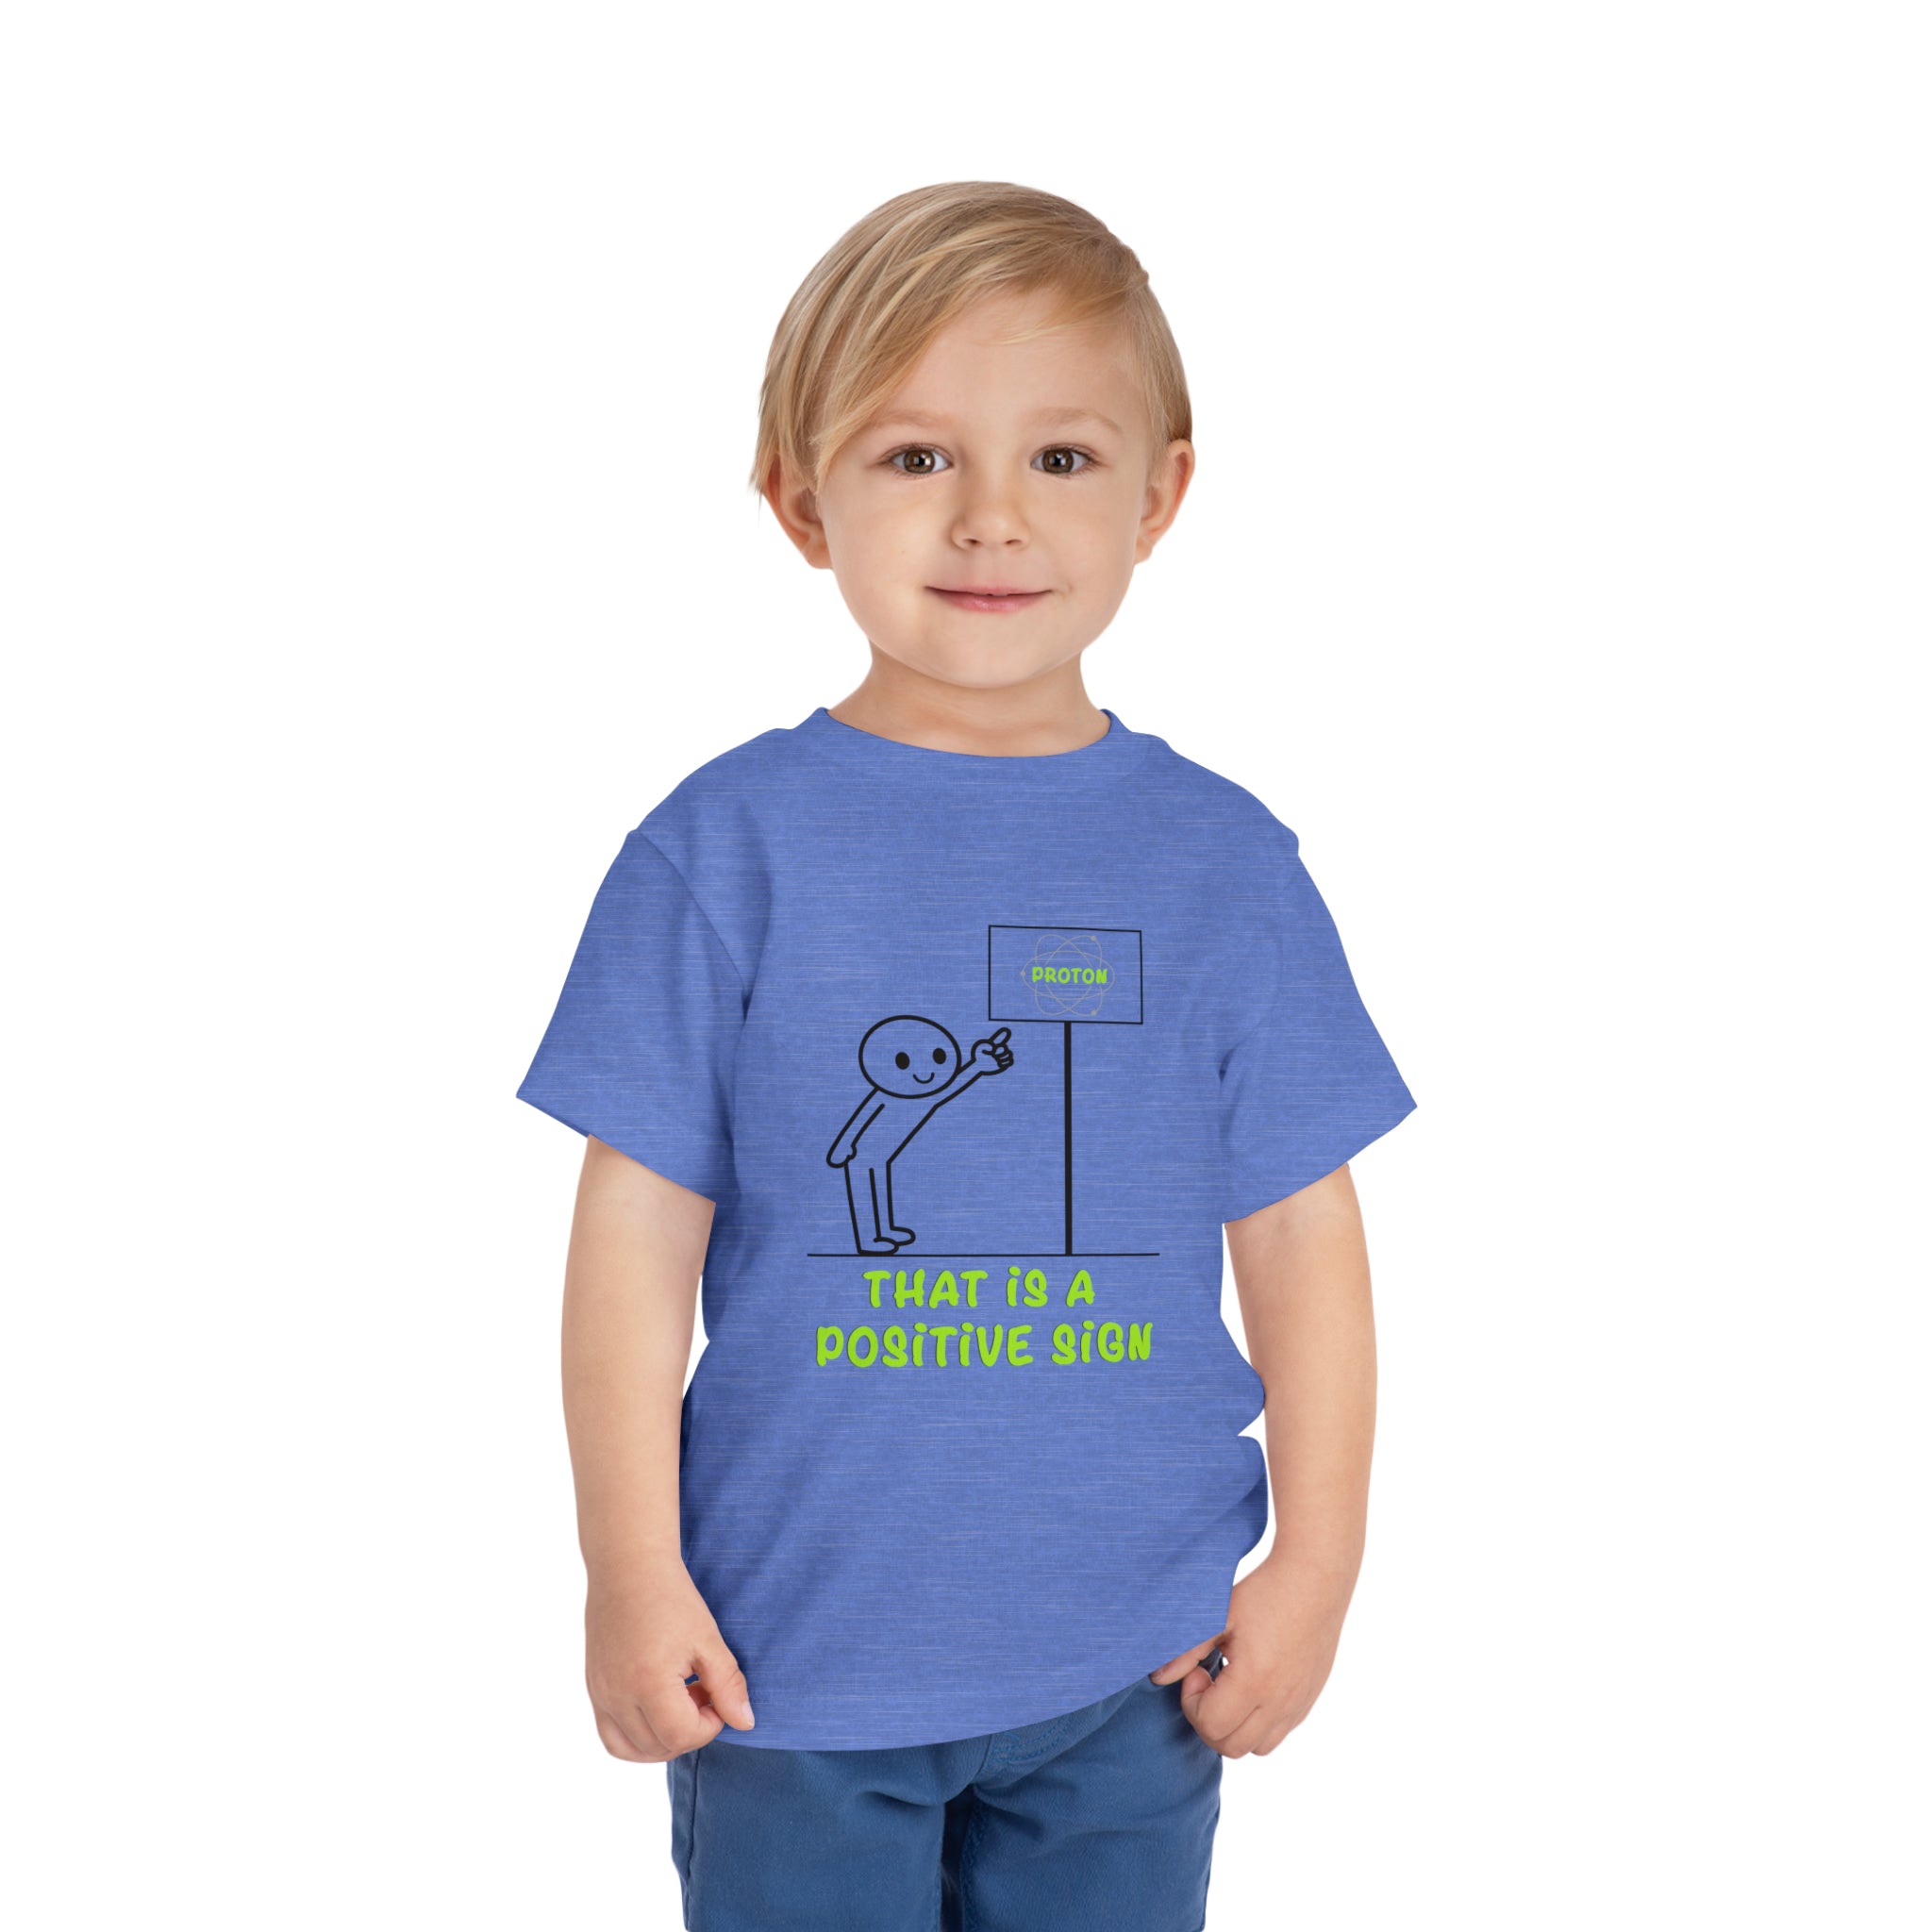 That is a Positive Sign [Toddler Tee]